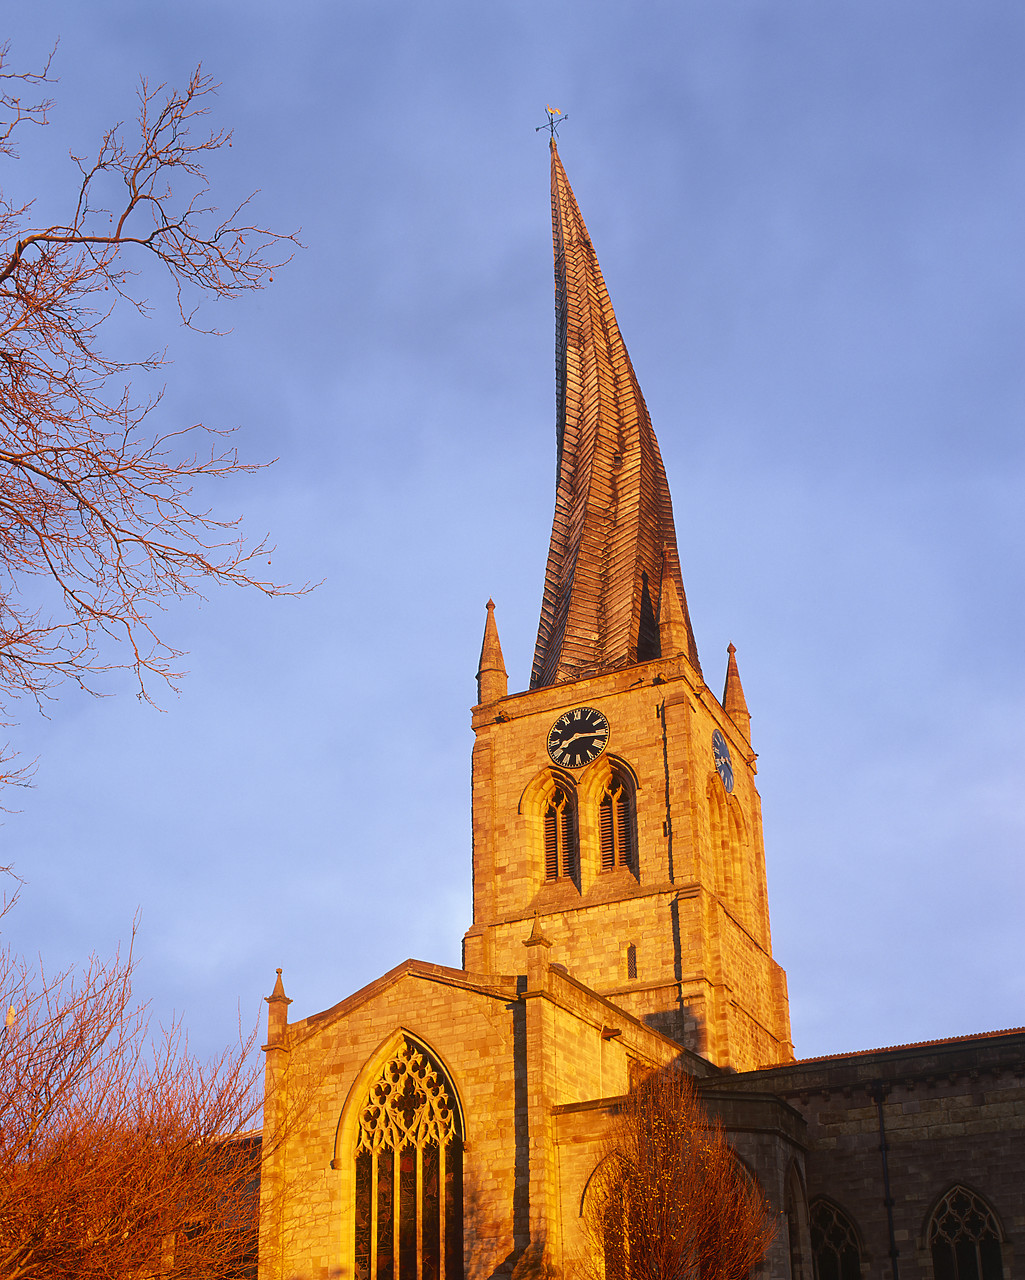 #040282-1 - Crooked Church Spire, Chesterfield, Derbyshire, England